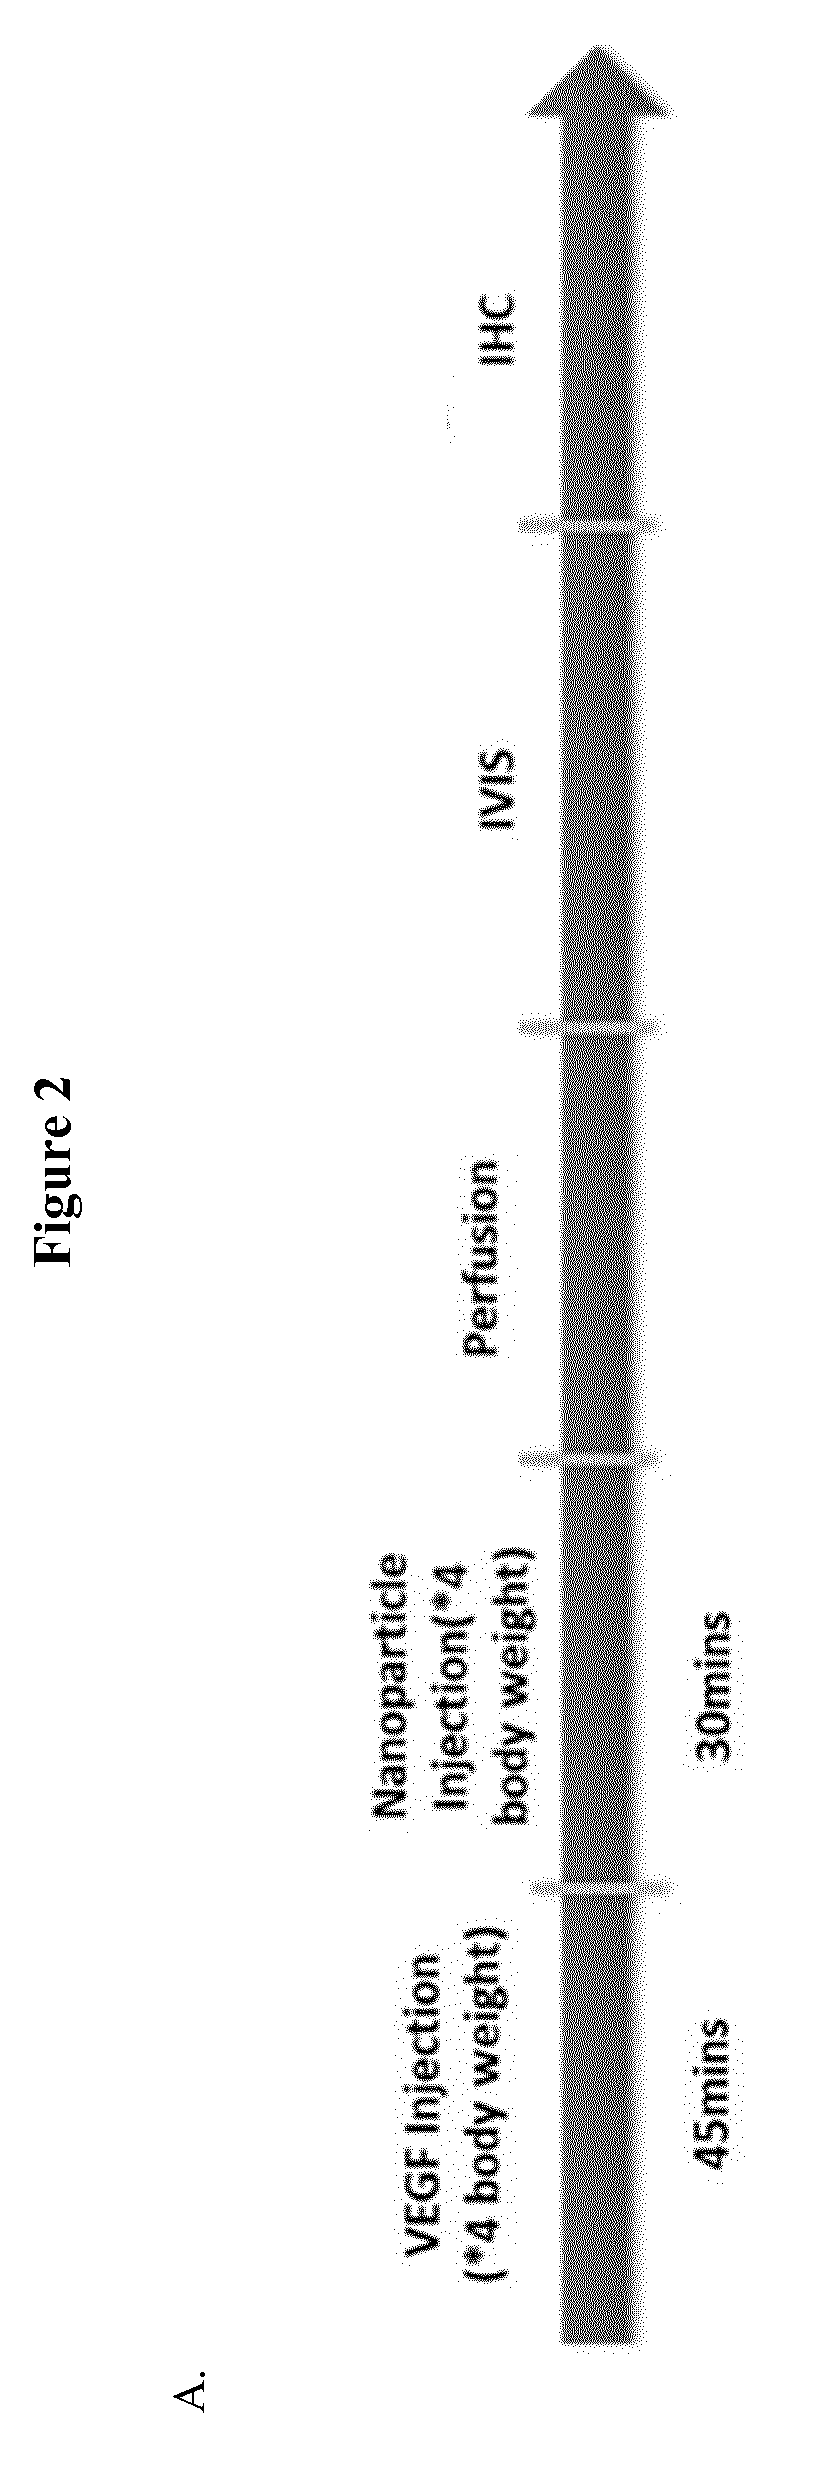 Methods for enhancing permeability to blood-brain barrier, and uses thereof